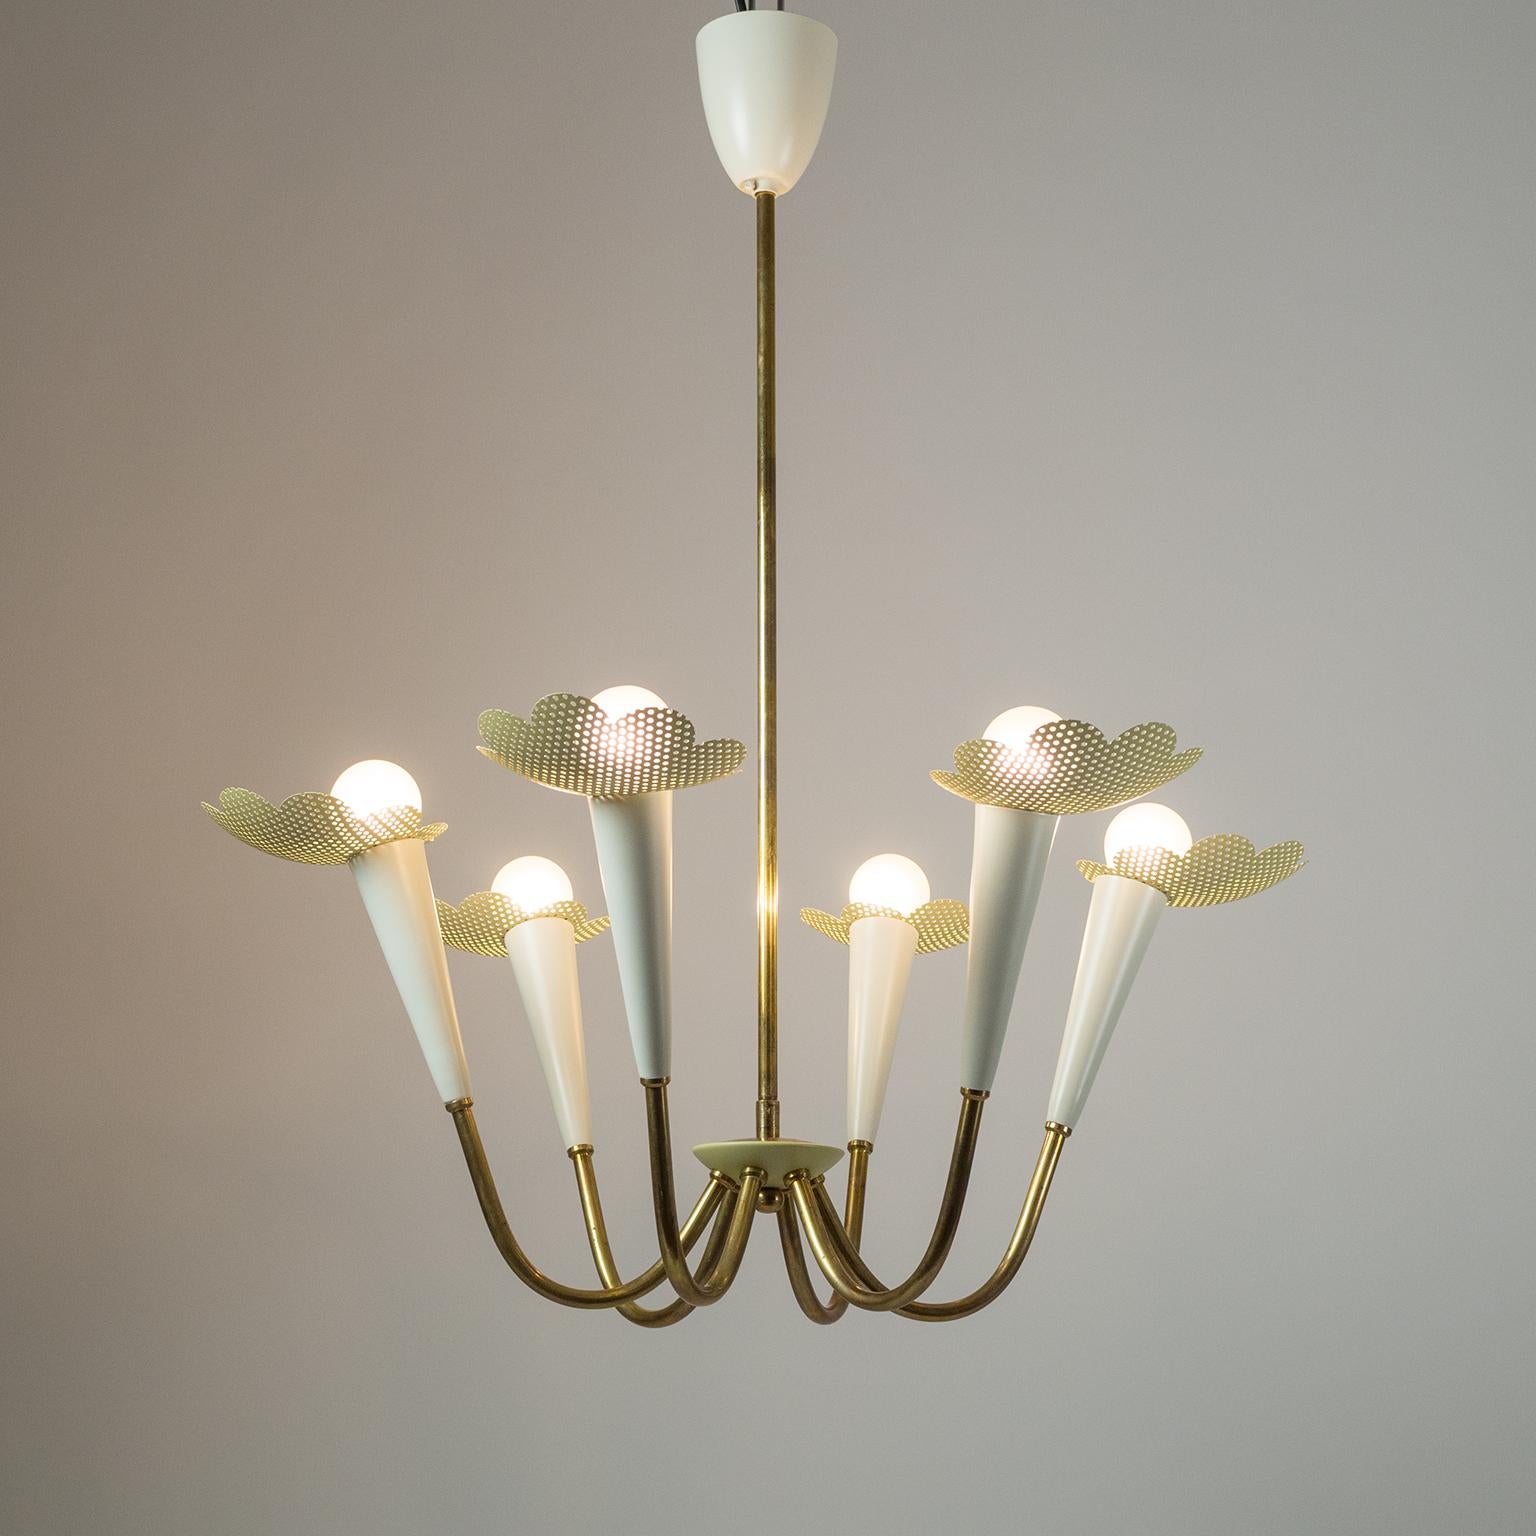 Lacquered 1950s Six-Arm Brass Chandelier with Pierced Shades